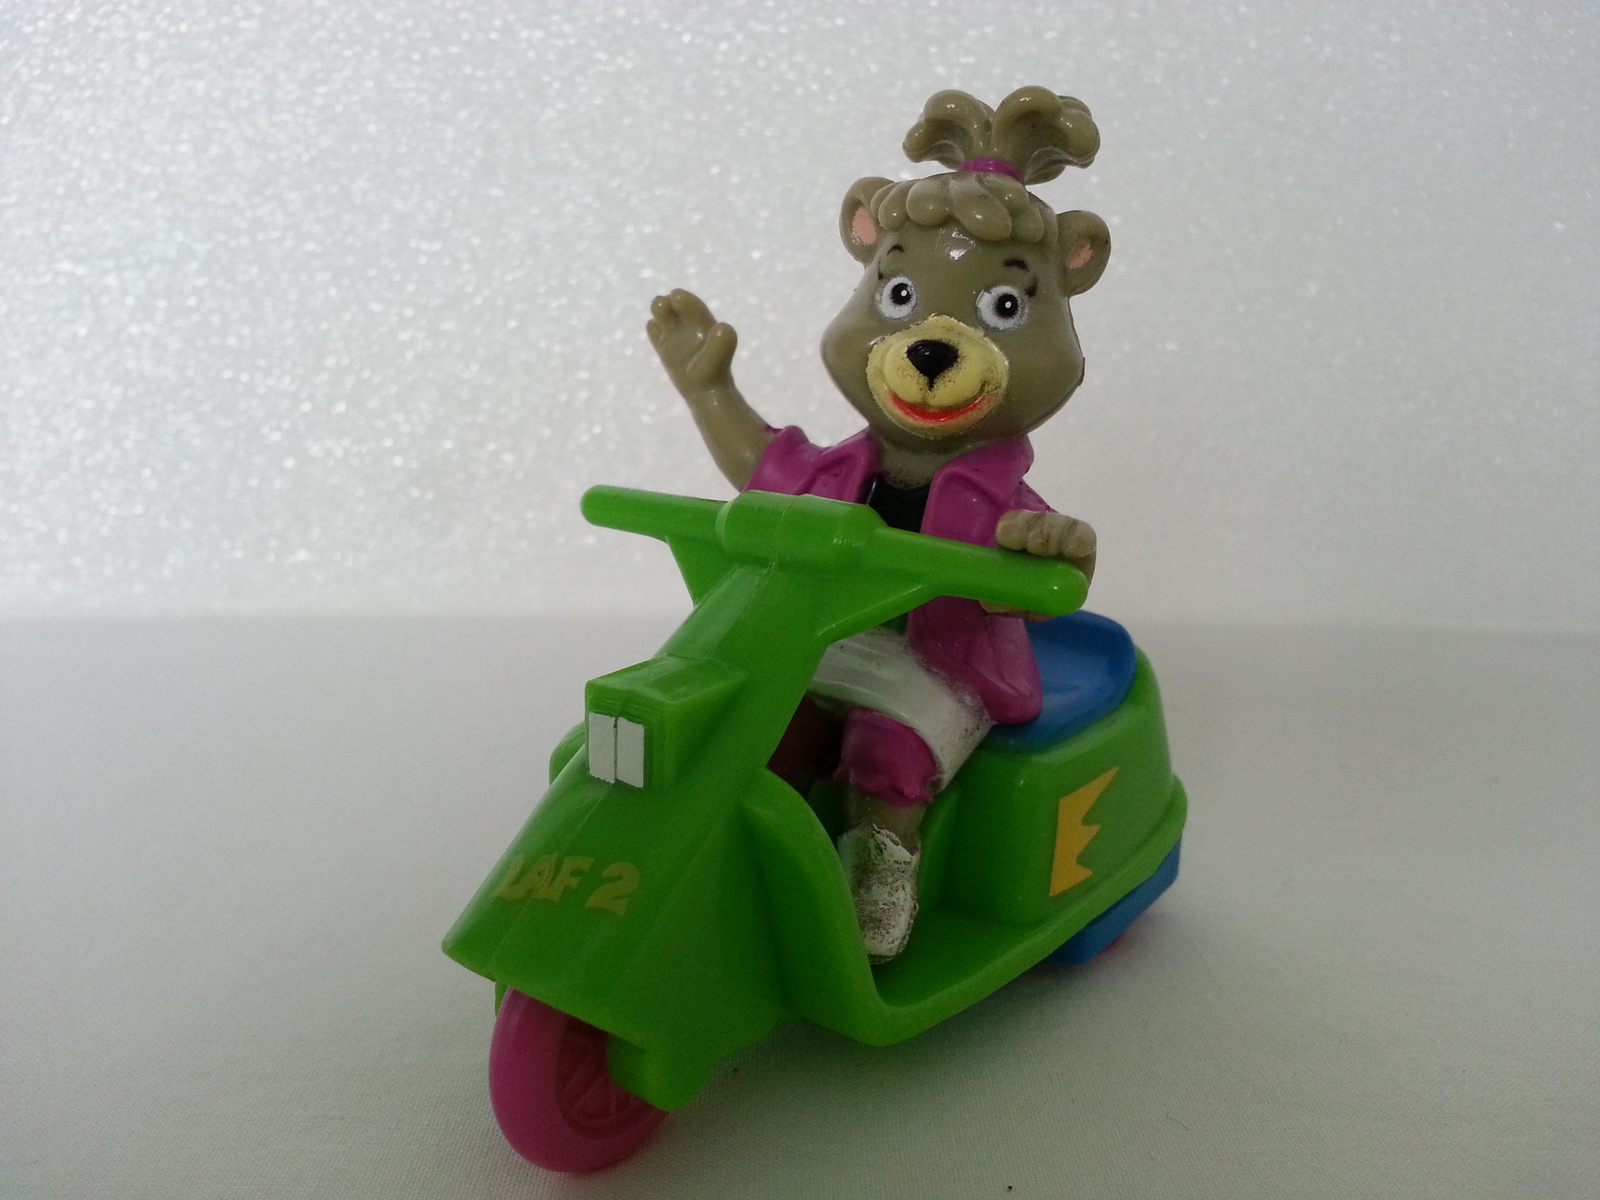 Hanna Barbera 1991 Cindy Bear in Scooter Friction Motor Childs Toy - $4.99